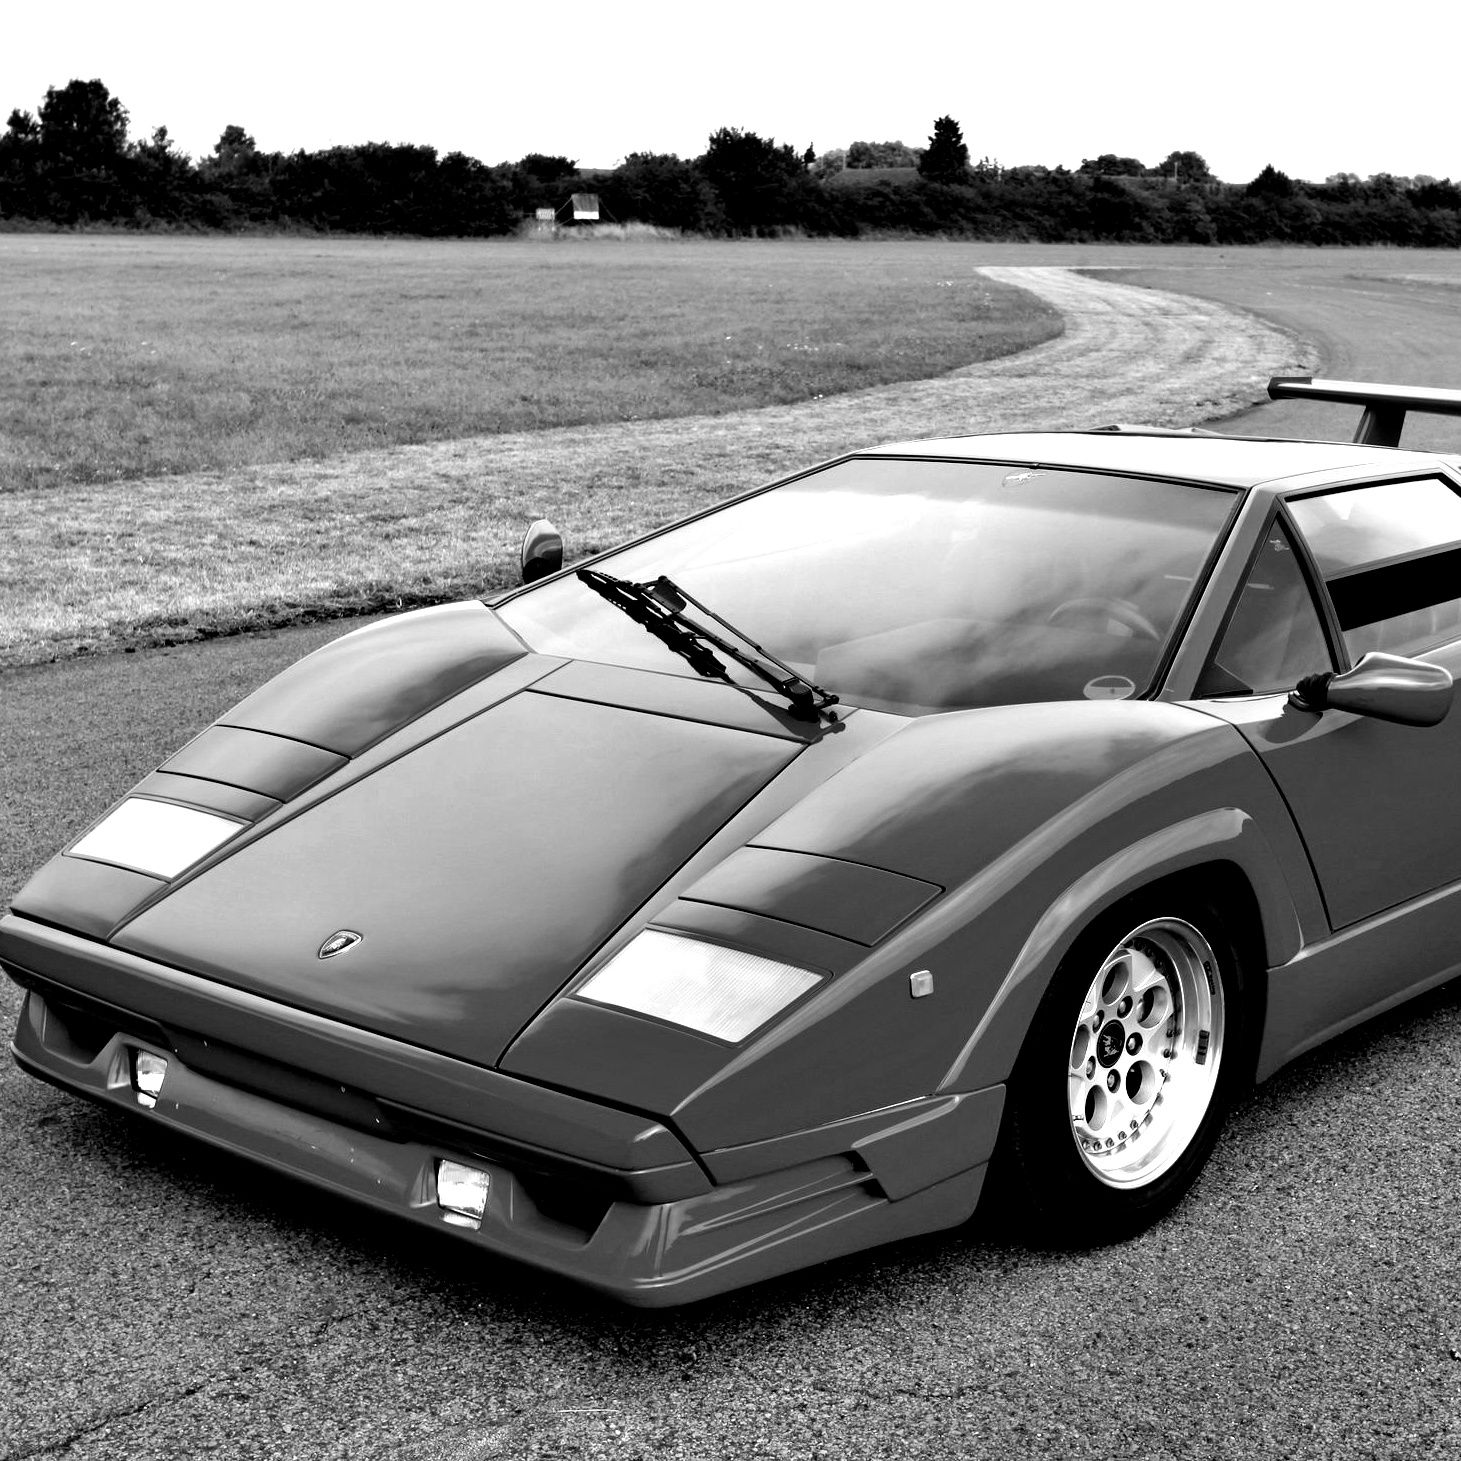 Speaking of Countach (071022)